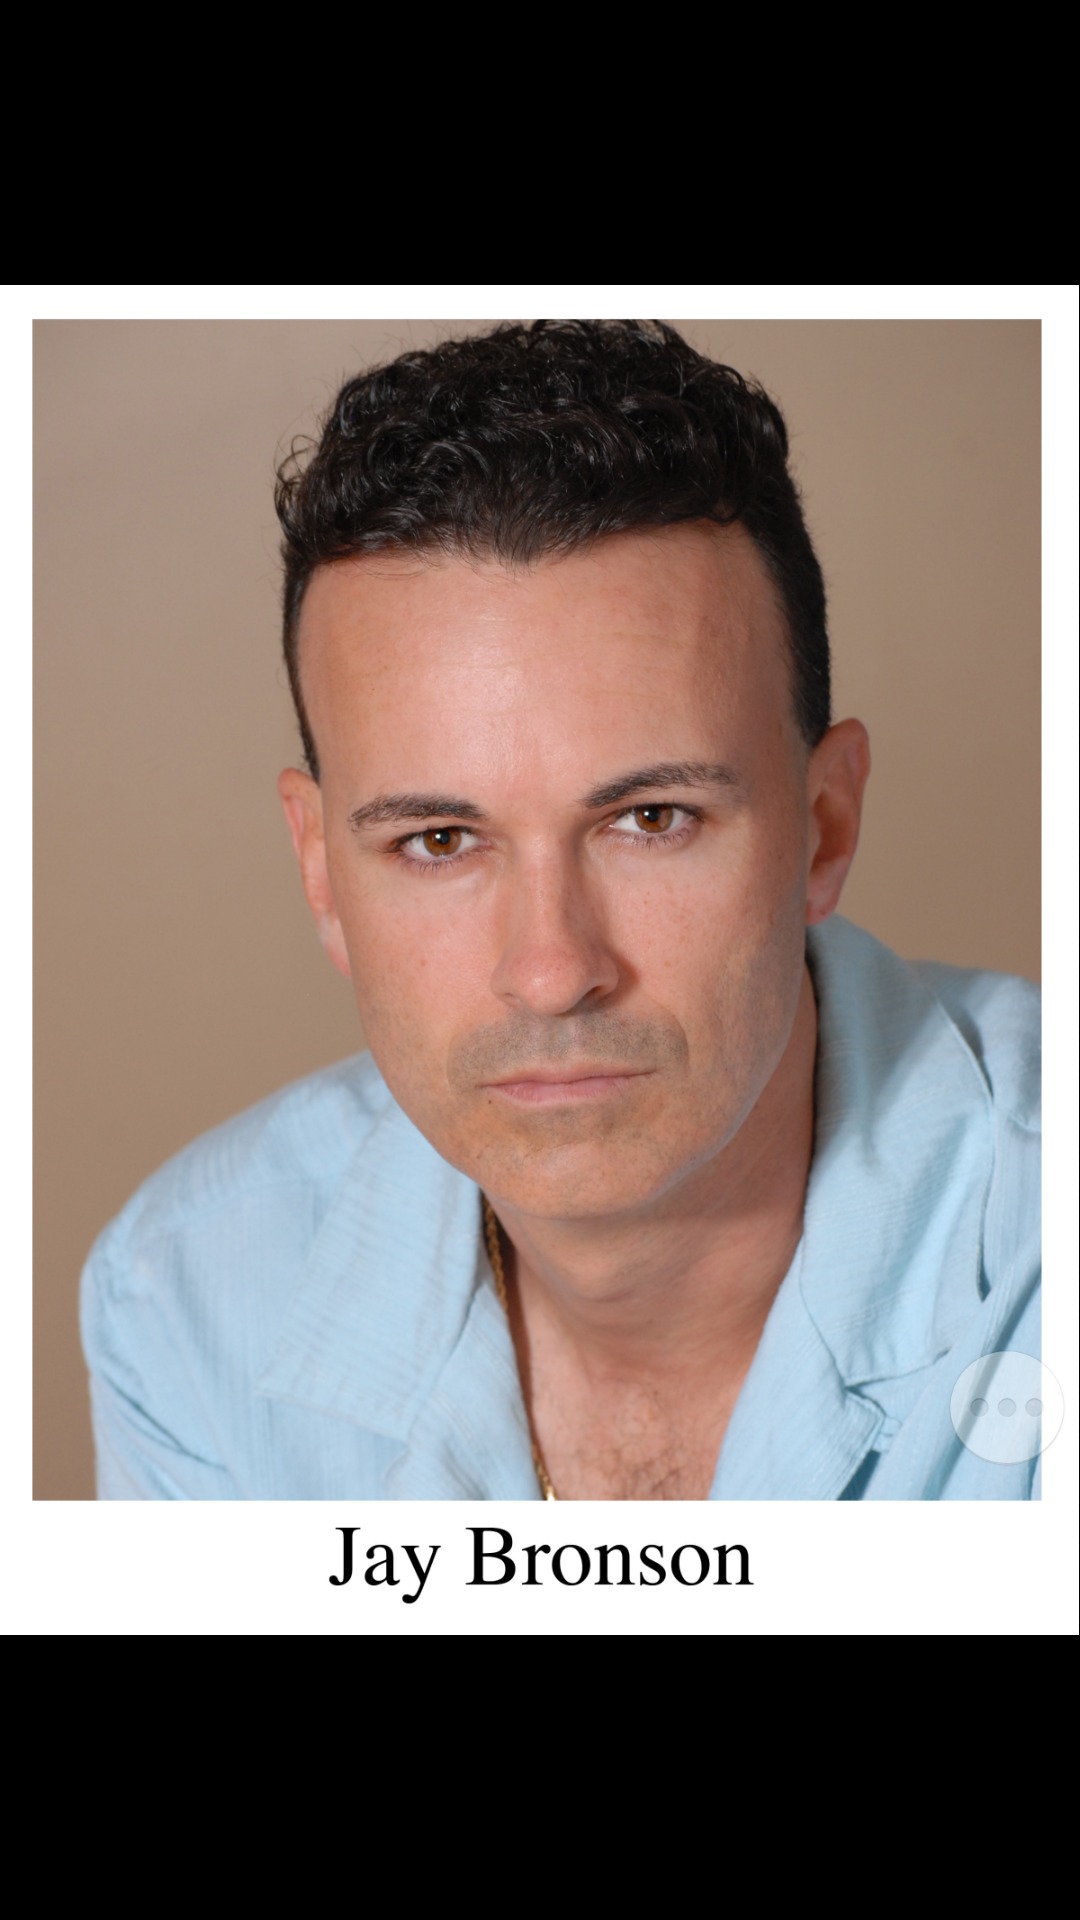 Head shot of actor, model and comedian Jay Bronson